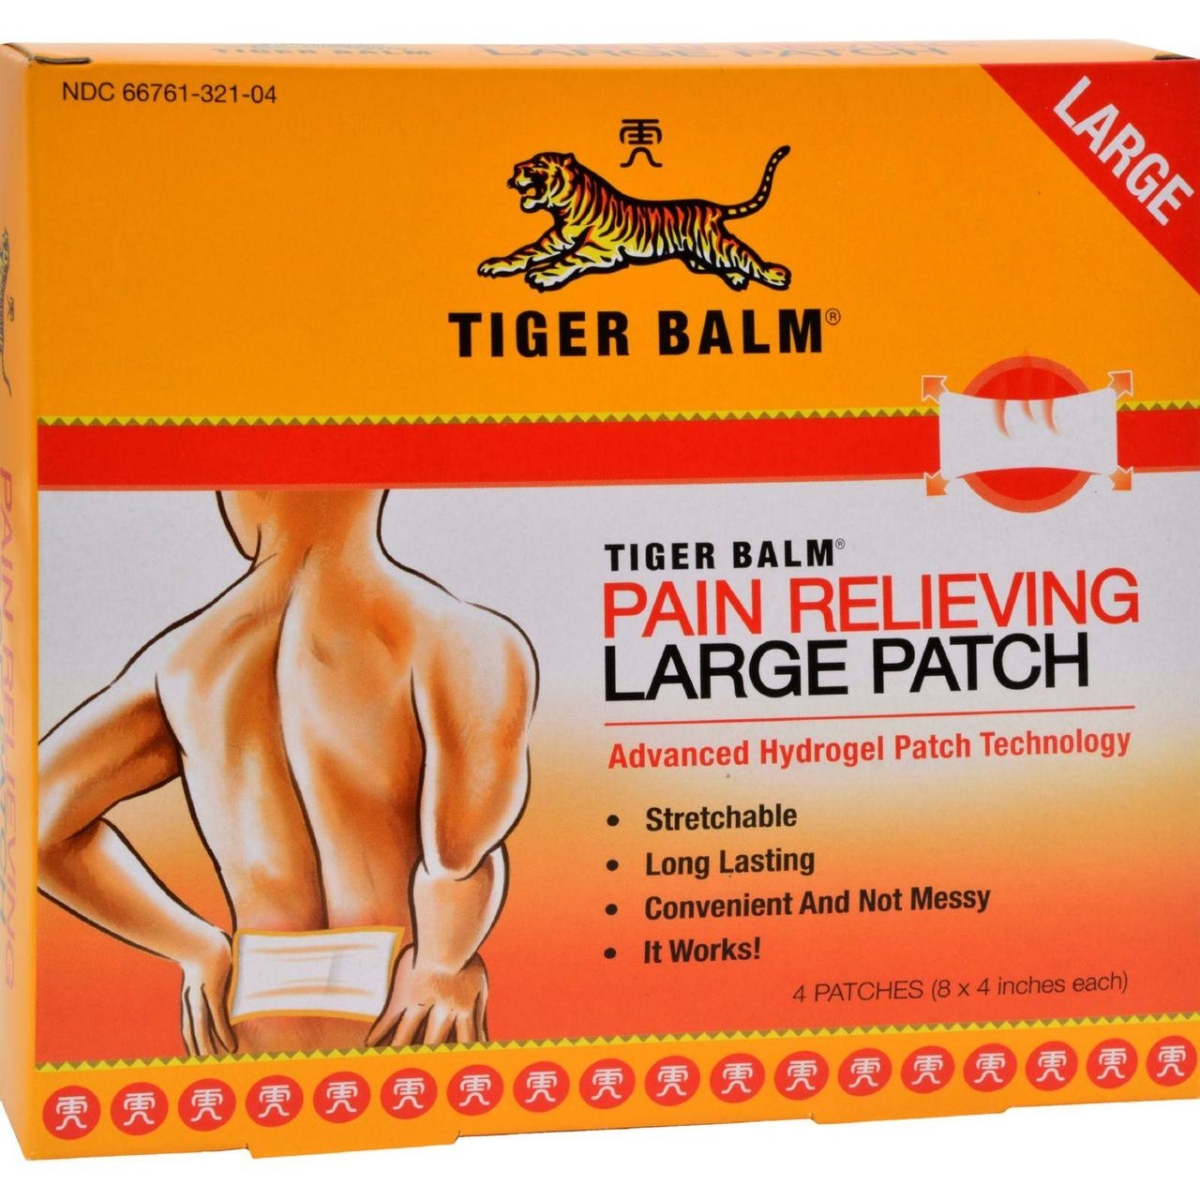 Hg0933150 Pain Relieving Large Patches, Case Of 6 - Pack Of 4